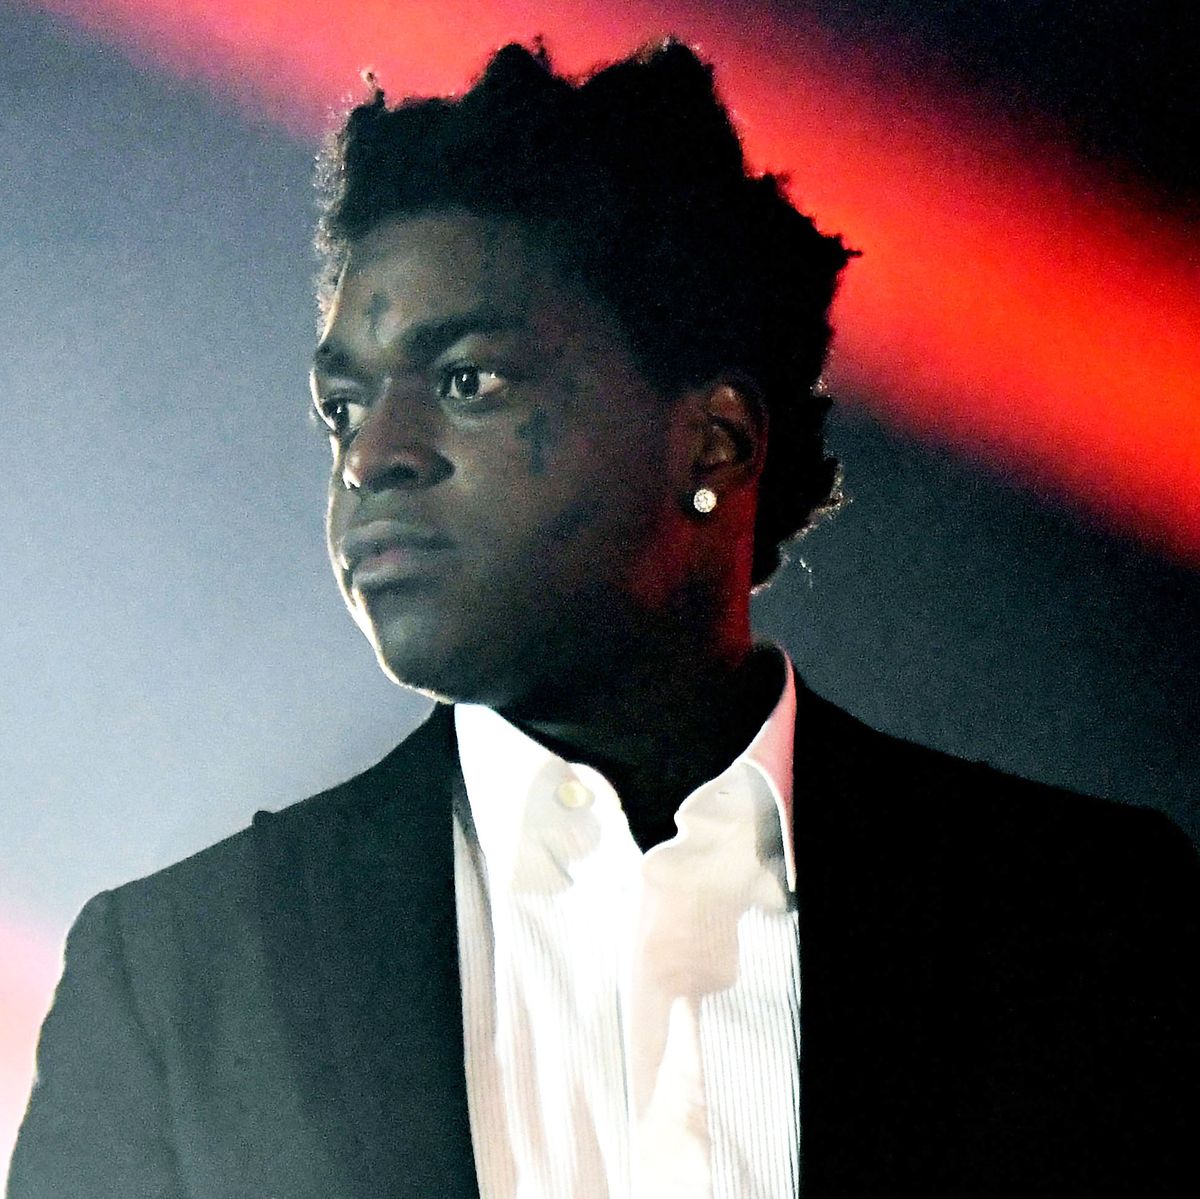 Kodak Black Sentenced To 46 Months On Federal Weapons Charge